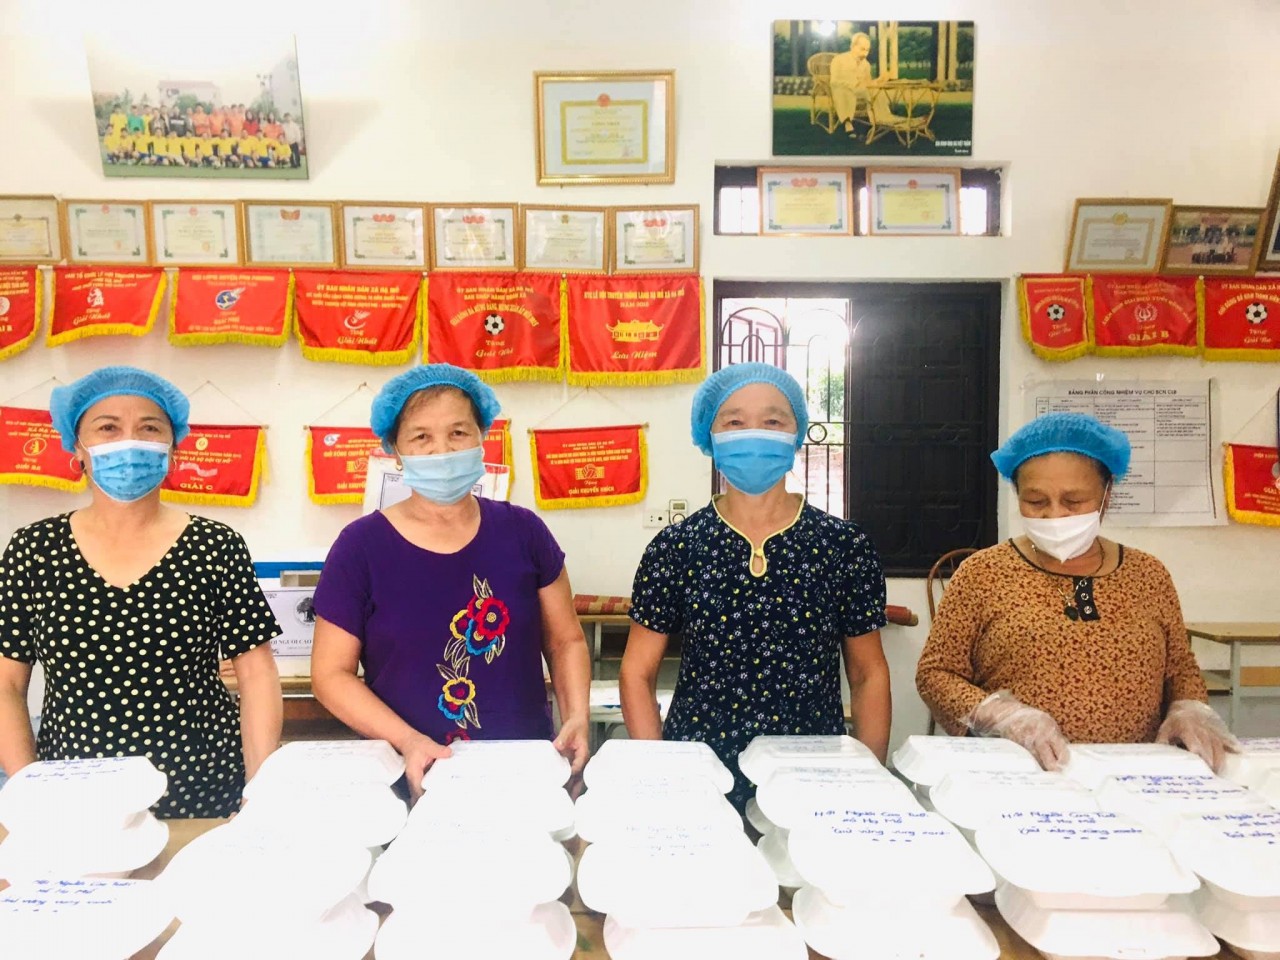 WB, Japan Supporting USD 2.75 Million to Promoting Community-based Care for the Elderly in Vietnam